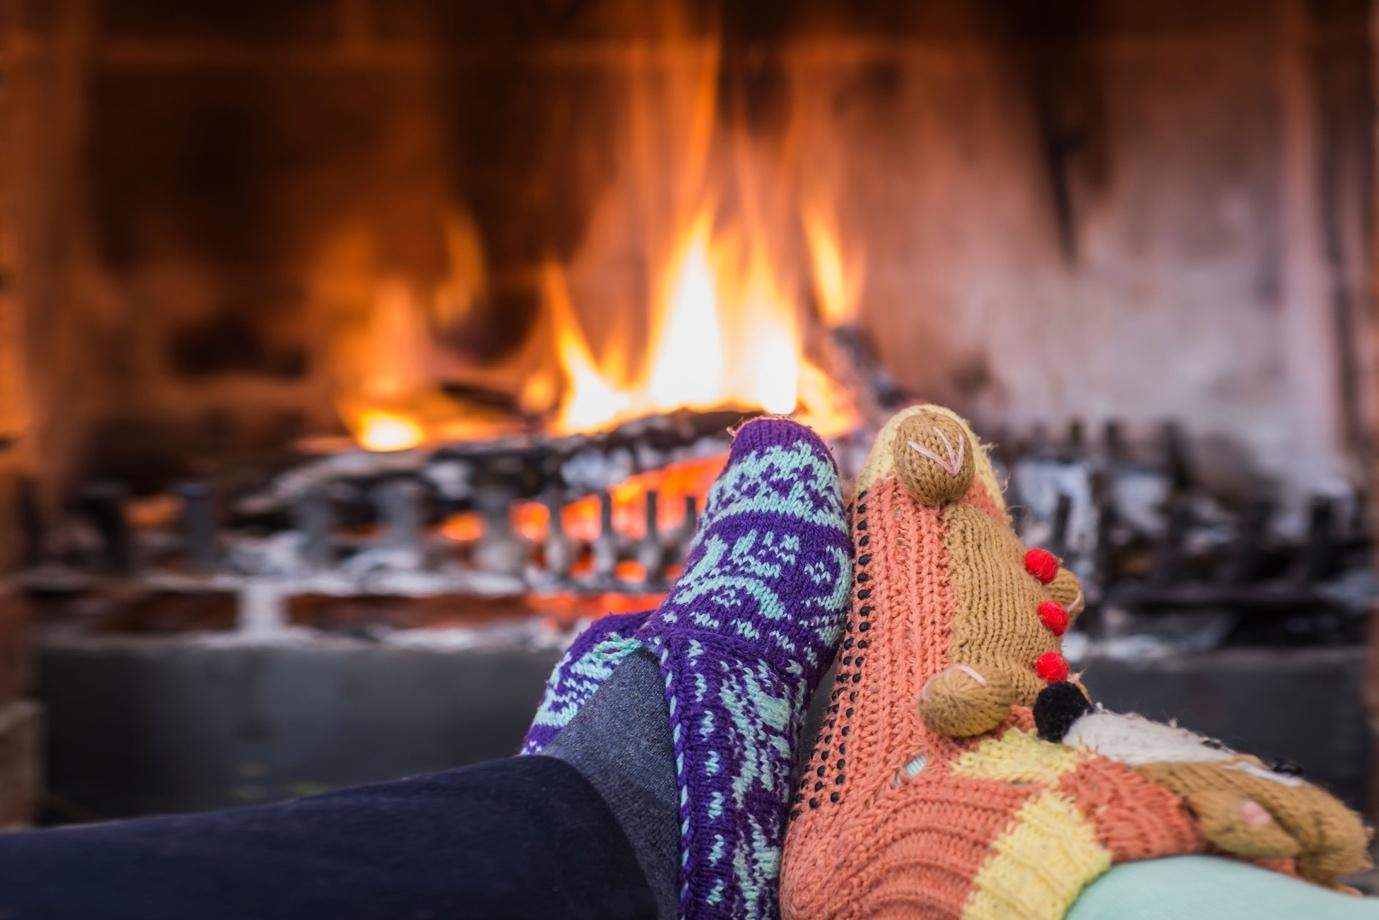 Cold feet or chilblains in front of a fireplace for treatement